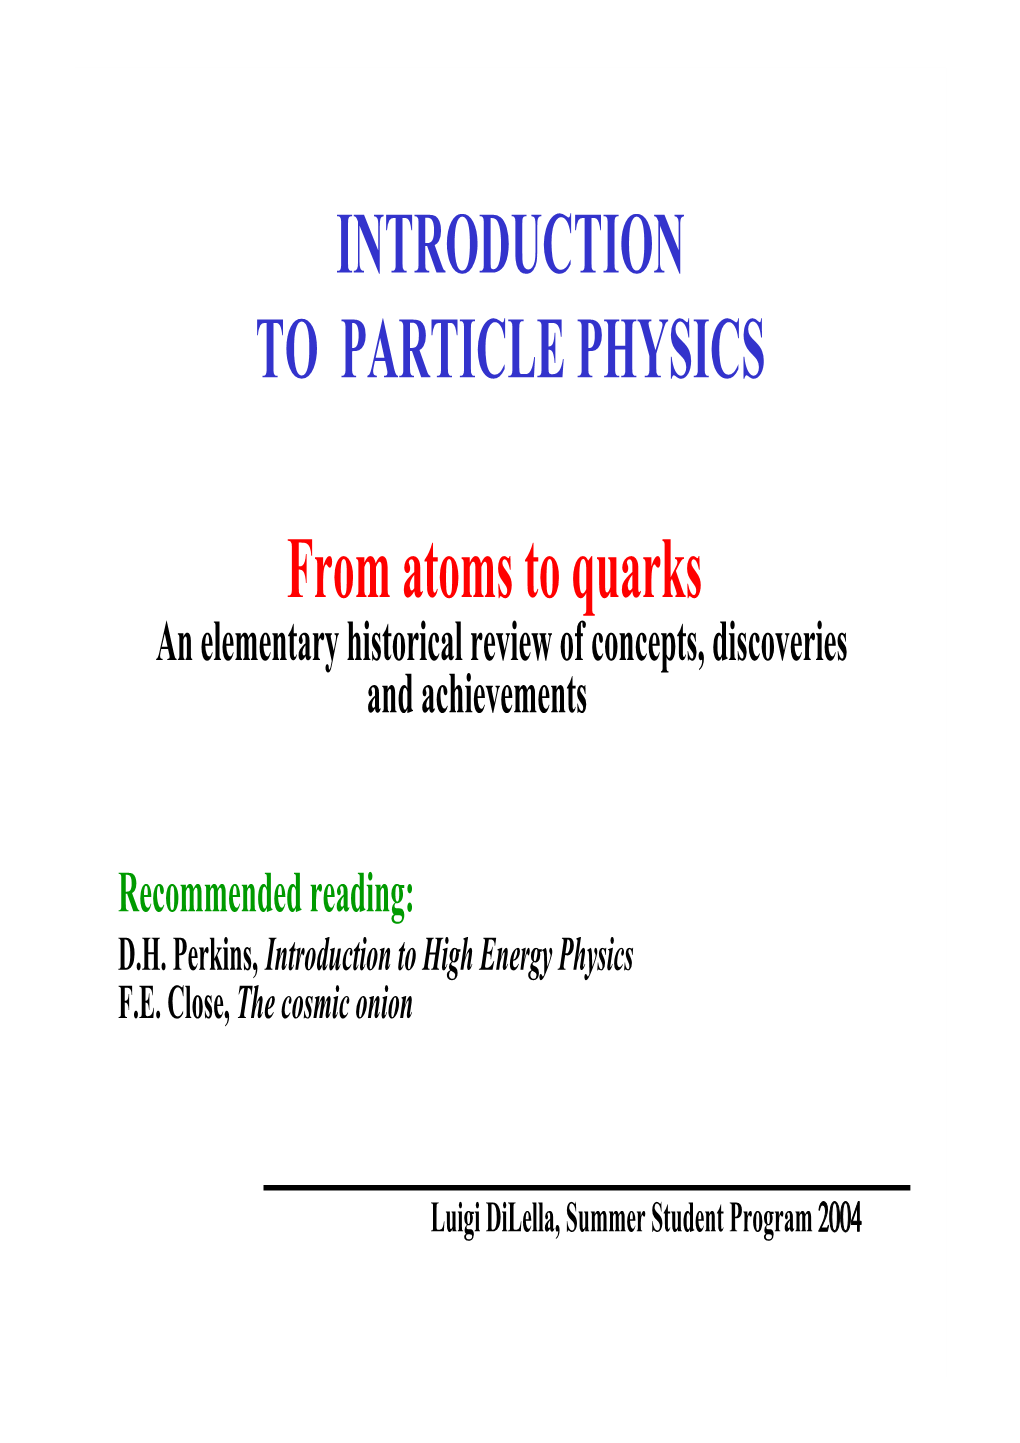 INTRODUCTION to PARTICLE PHYSICS from Atoms to Quarks